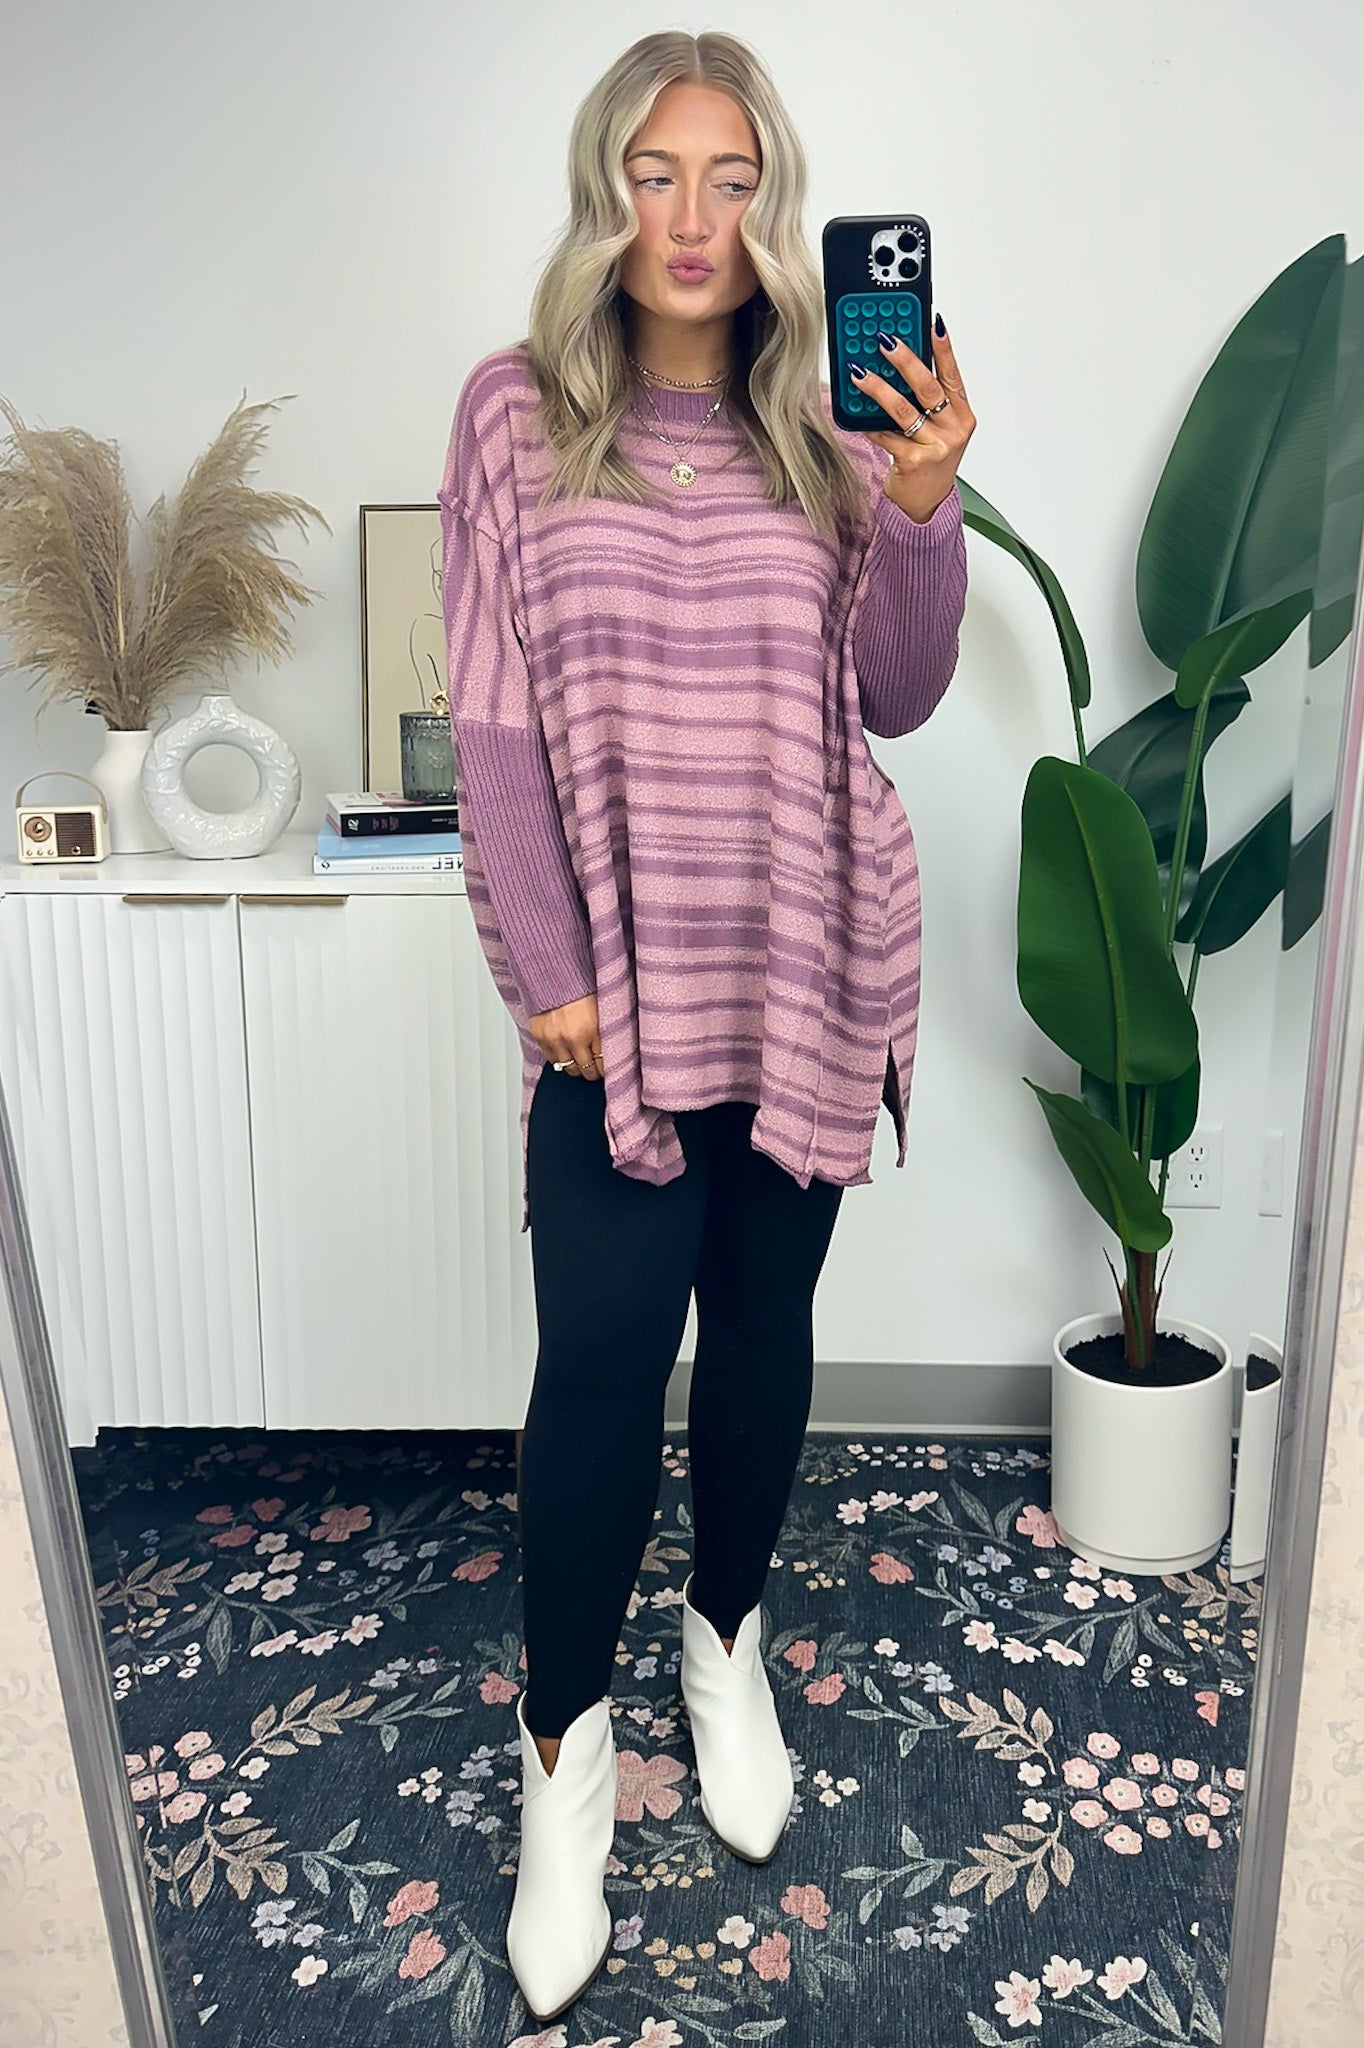  Cassidie Relaxed Fit Striped Sweater - Madison and Mallory